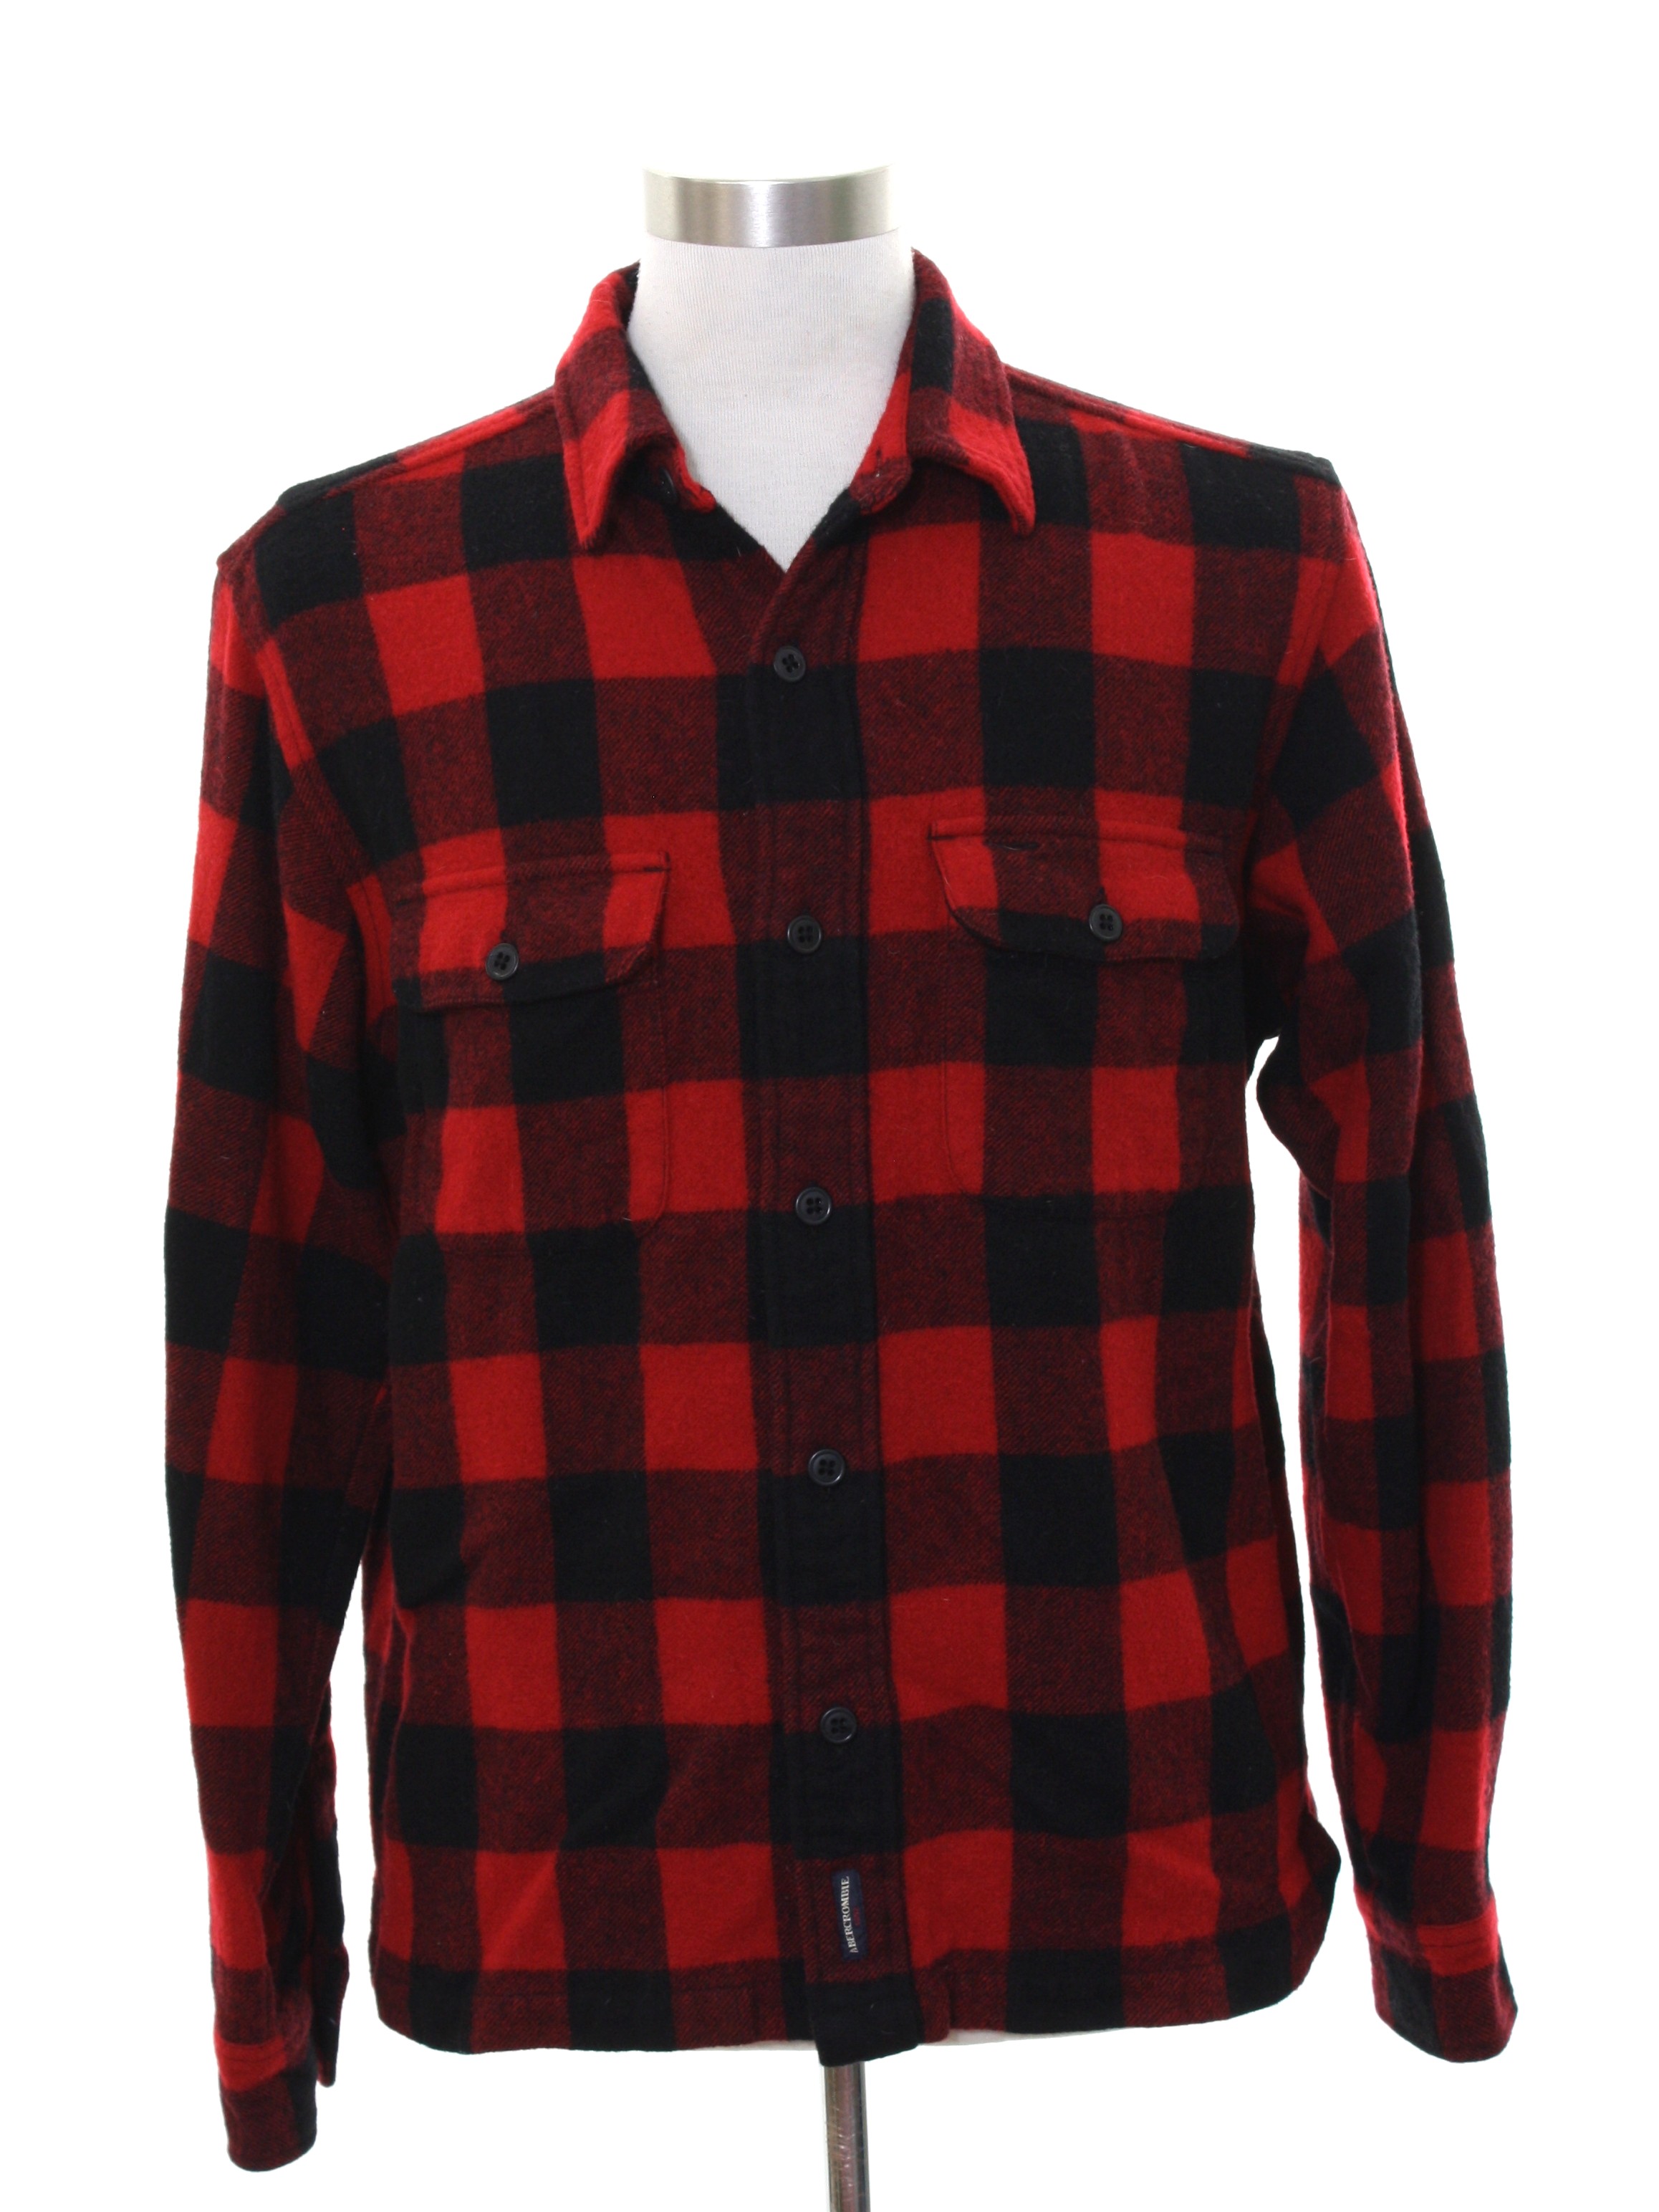 abercrombie & fitch flannel jacket